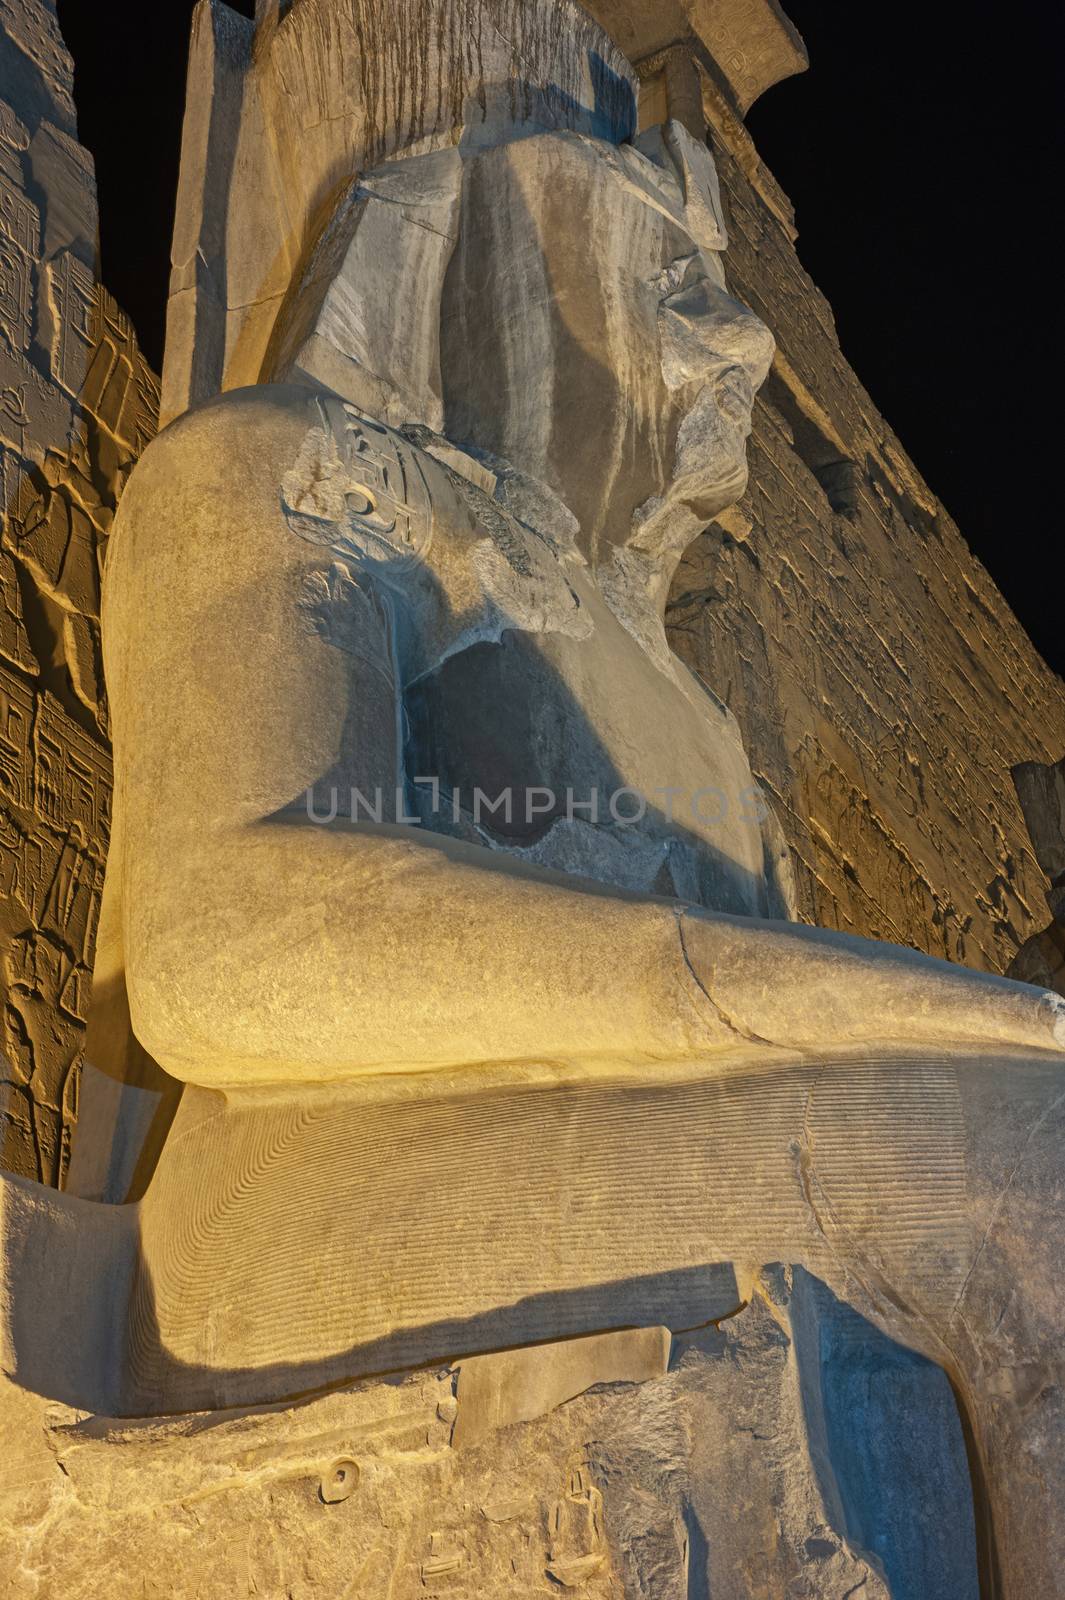 Large statue of Ramses II at entrance pylon to ancient egyptian Luxor Temple lit up during night